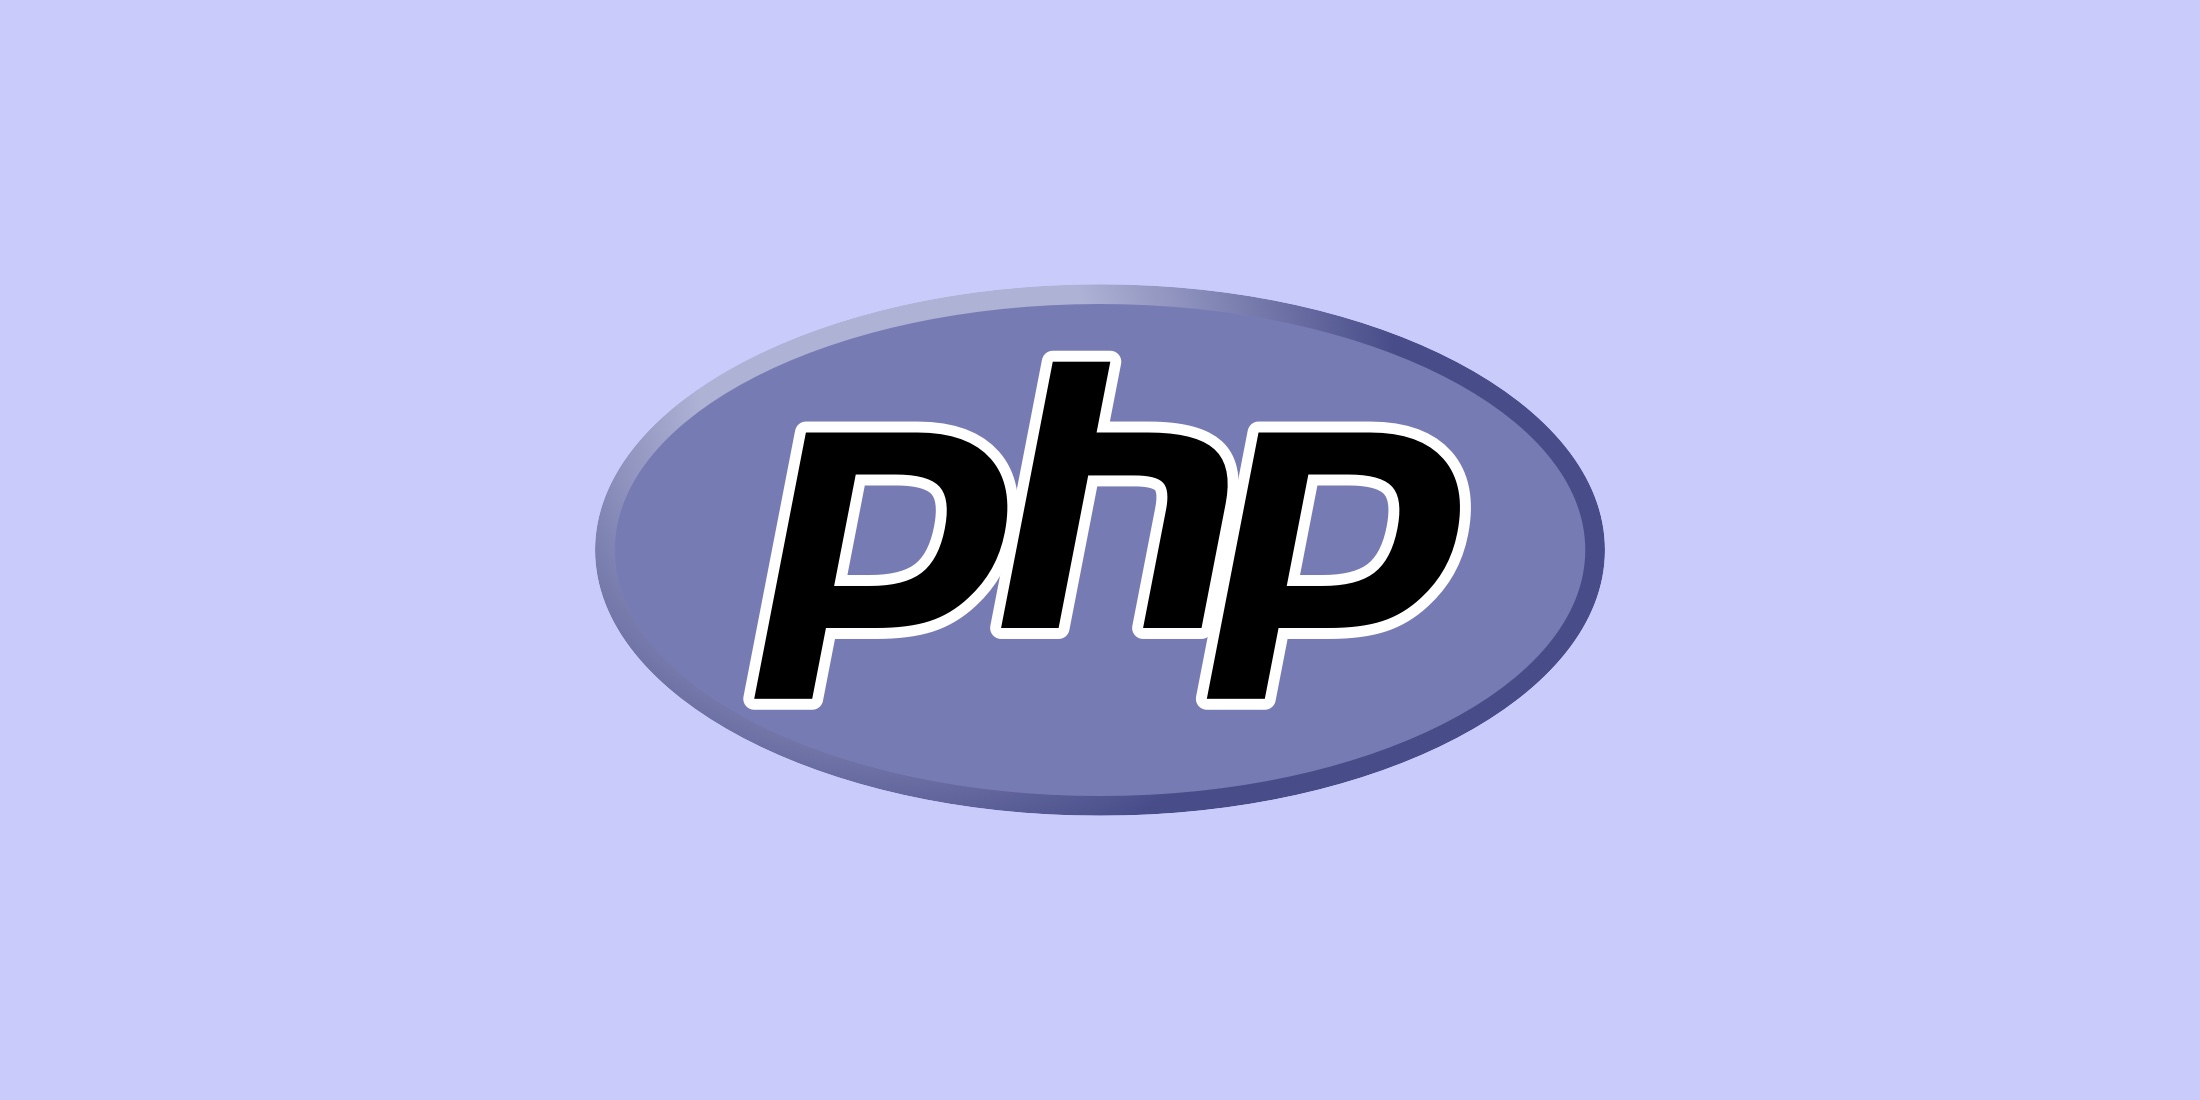 Announcing the PHP Foundation image